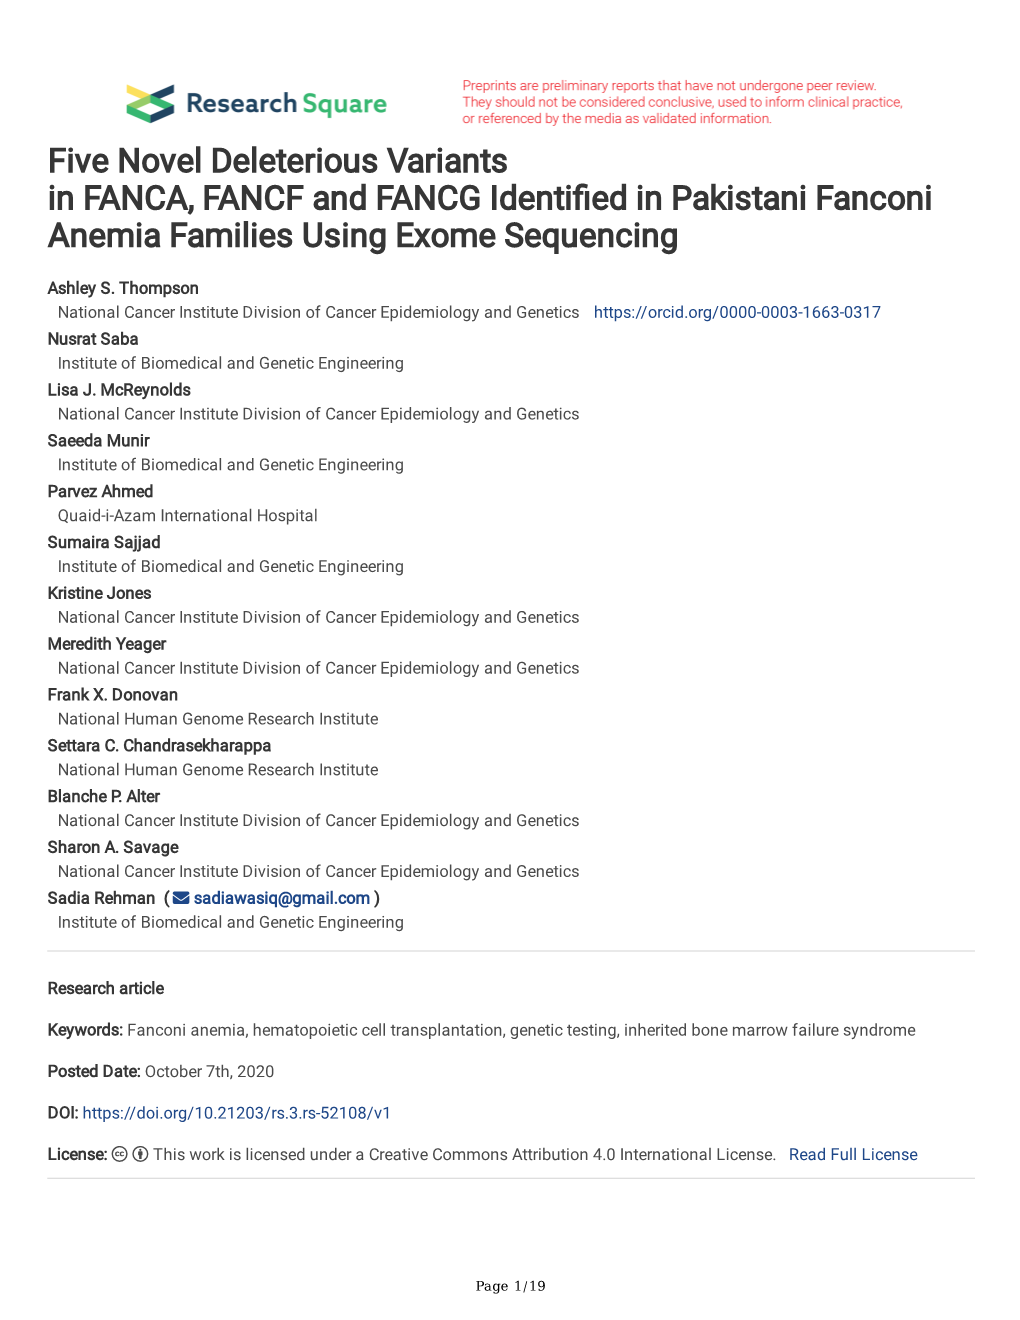 Five Novel Deleterious Variants in FANCA, FANCF and FANCG Identi Ed in Pakistani Fanconi Anemia Families Using Exome Sequen